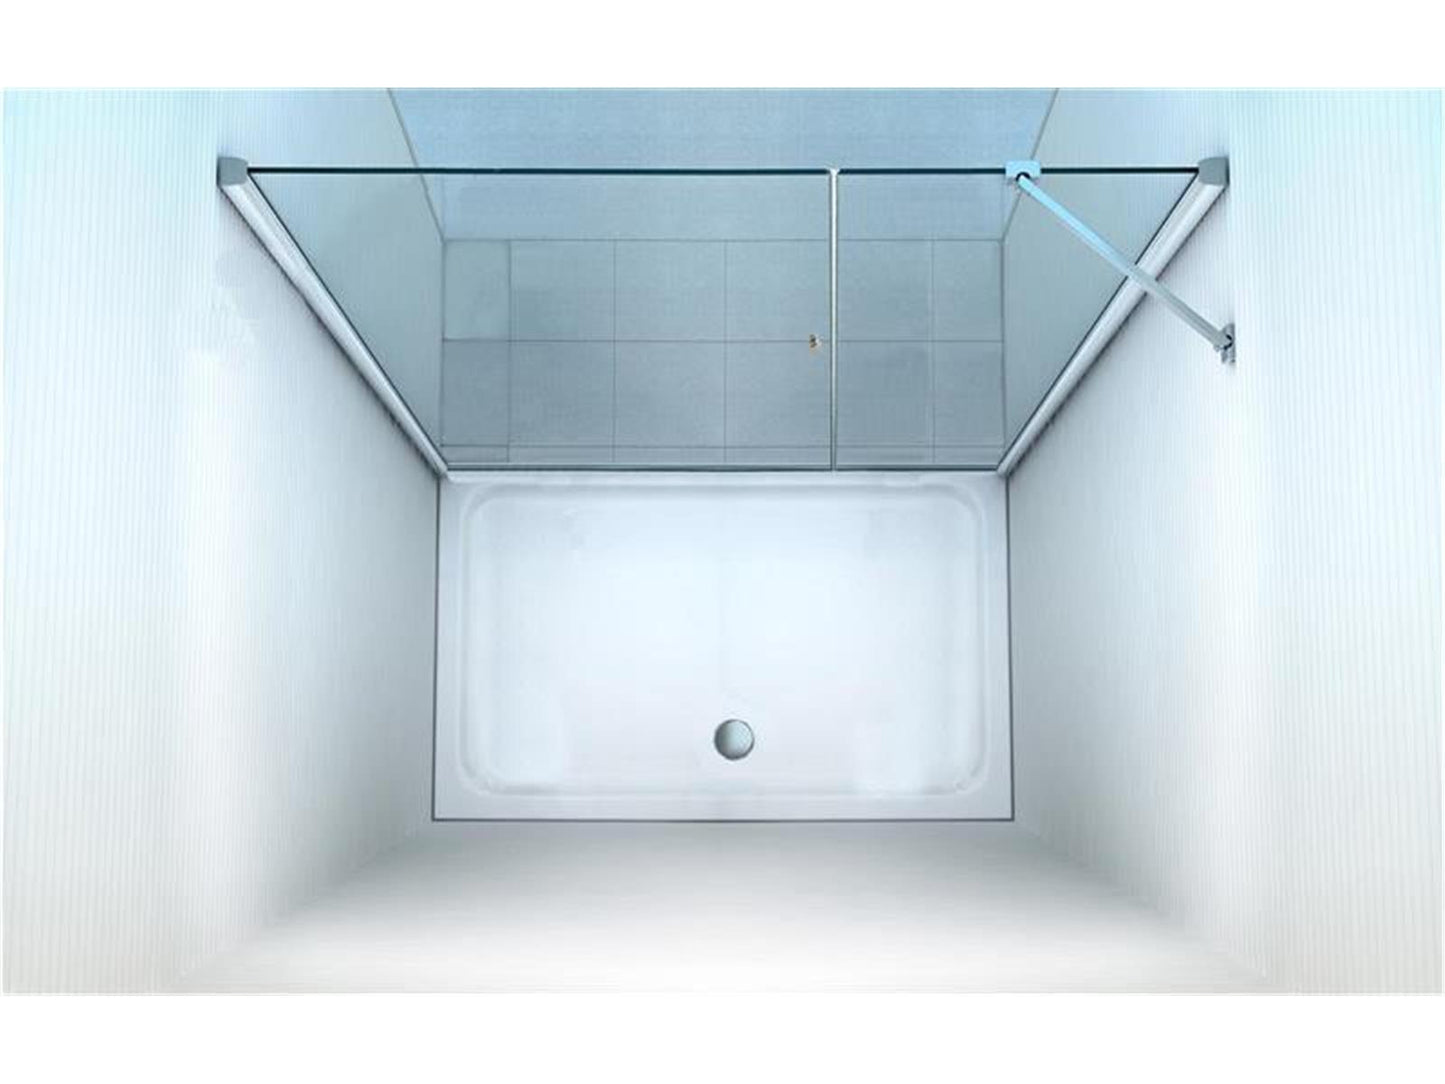 GlasHomeCenter - niche cabin Florida (155 x 195 cm) - 8mm toughened safety glass - without shower tray